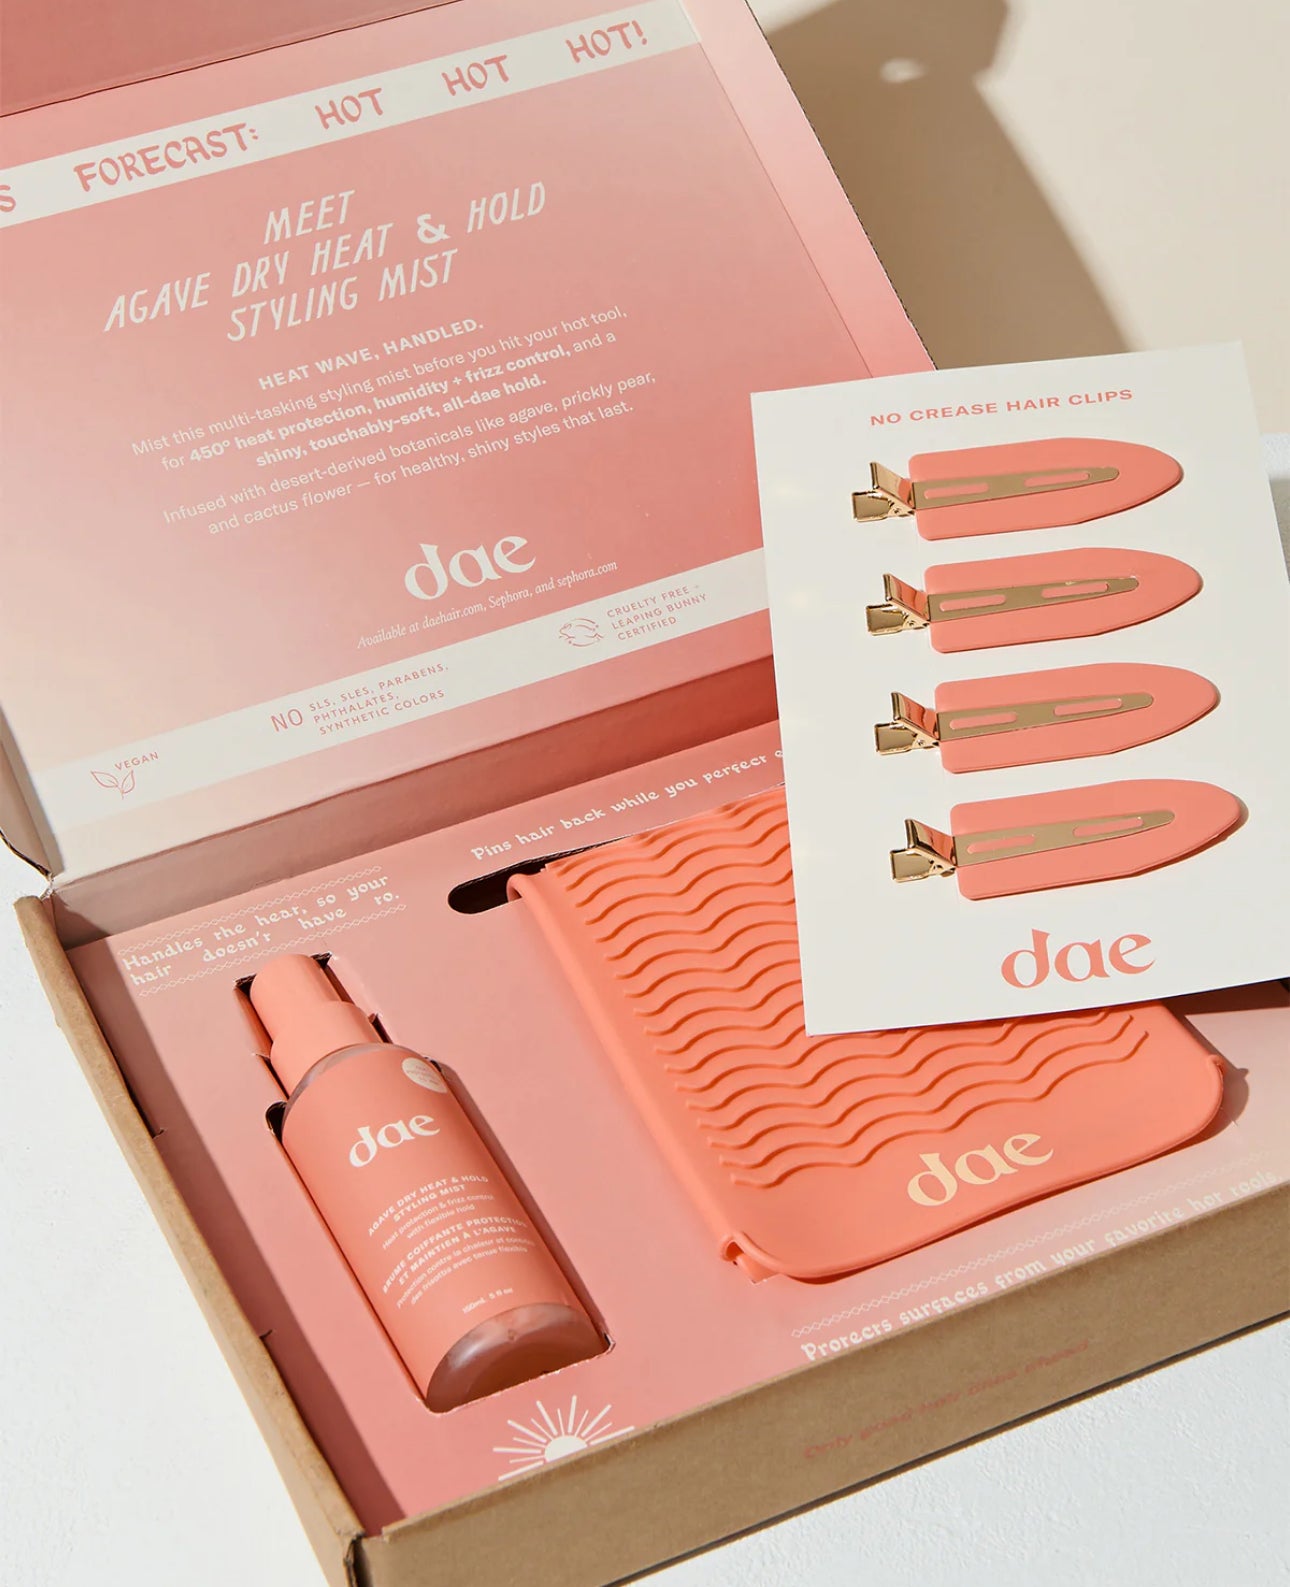 Agave Dry Heat Limited Edition Styling Kit *Pre-Order*